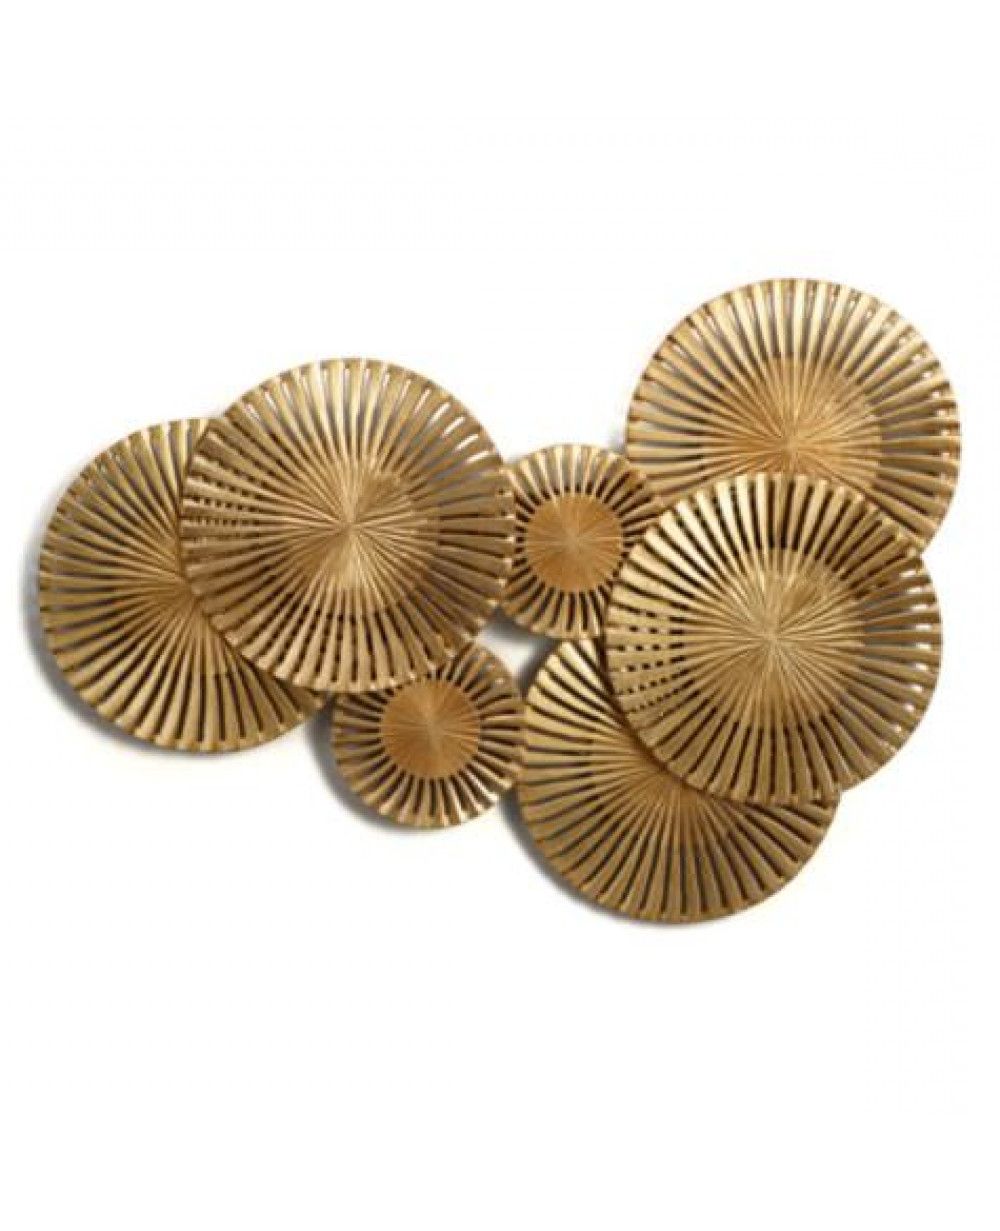 Widely Used Handcrafted Metal Wall Décor With Handcrafted Old Brass Copper 6 Pcs Sunburst Golden Color (View 2 of 20)